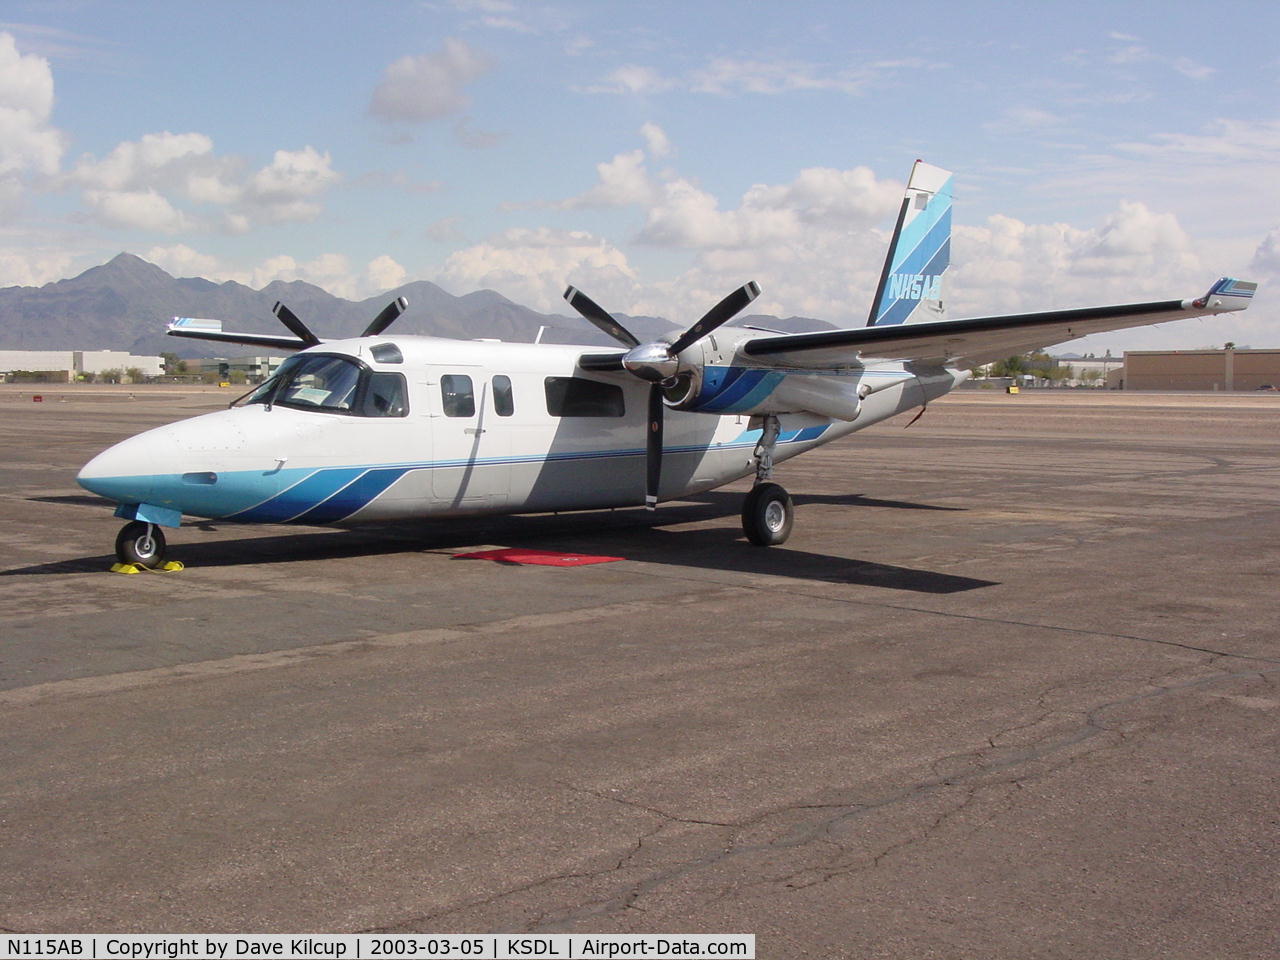 N115AB, 1975 Rockwell 690A Turbo Commander C/N 11231, Great paint scheme on N115AB - a nice example of the 690A